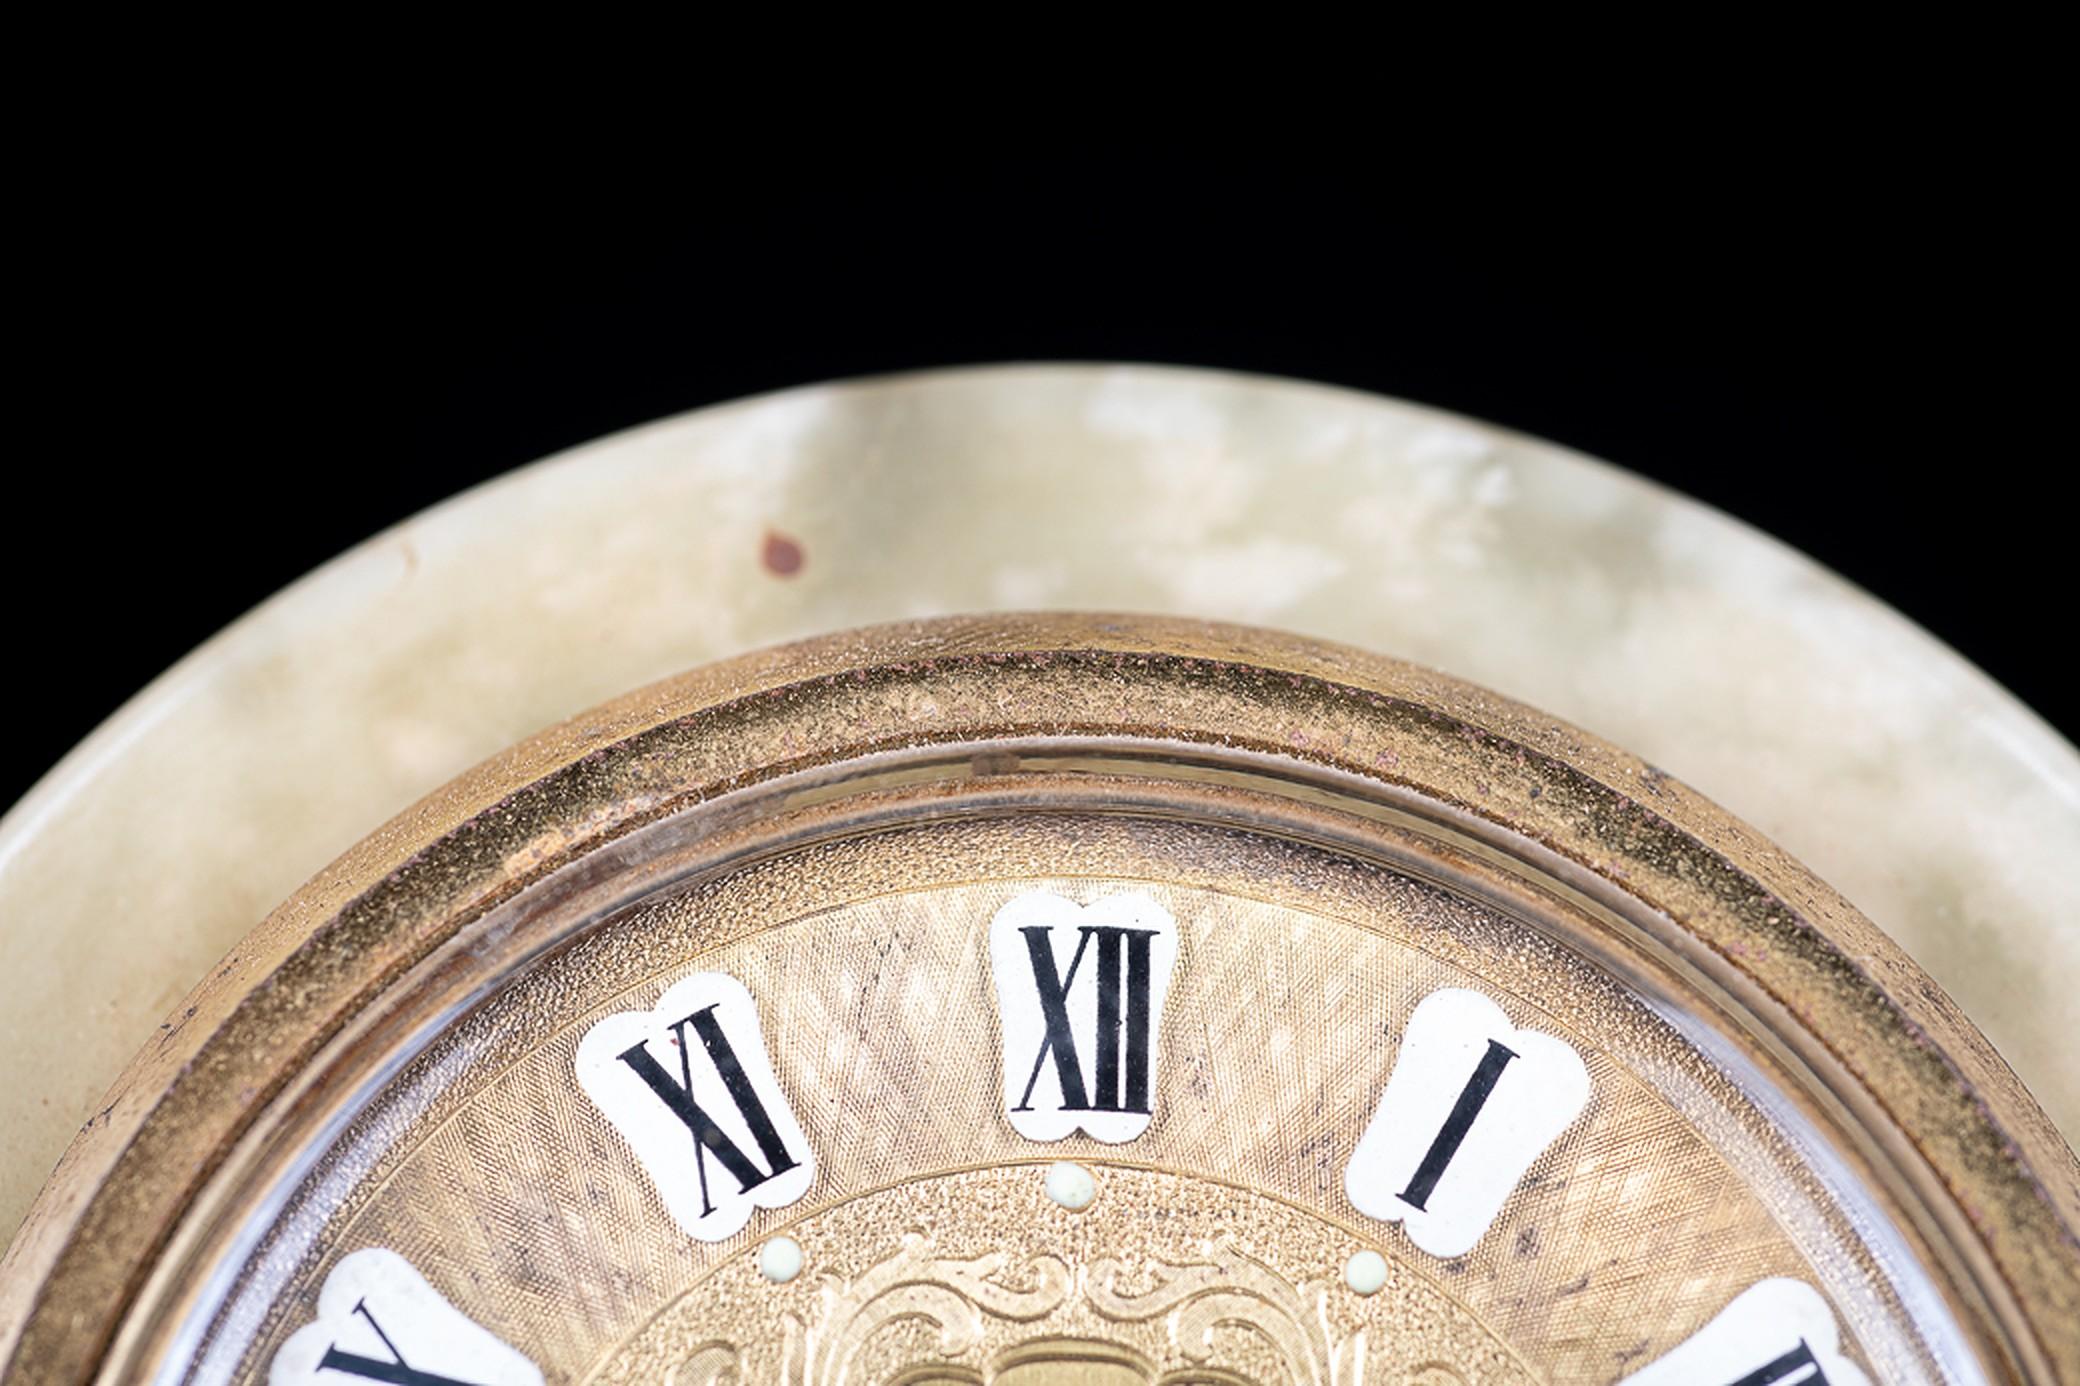 Marble imitation, stamped in clockface 